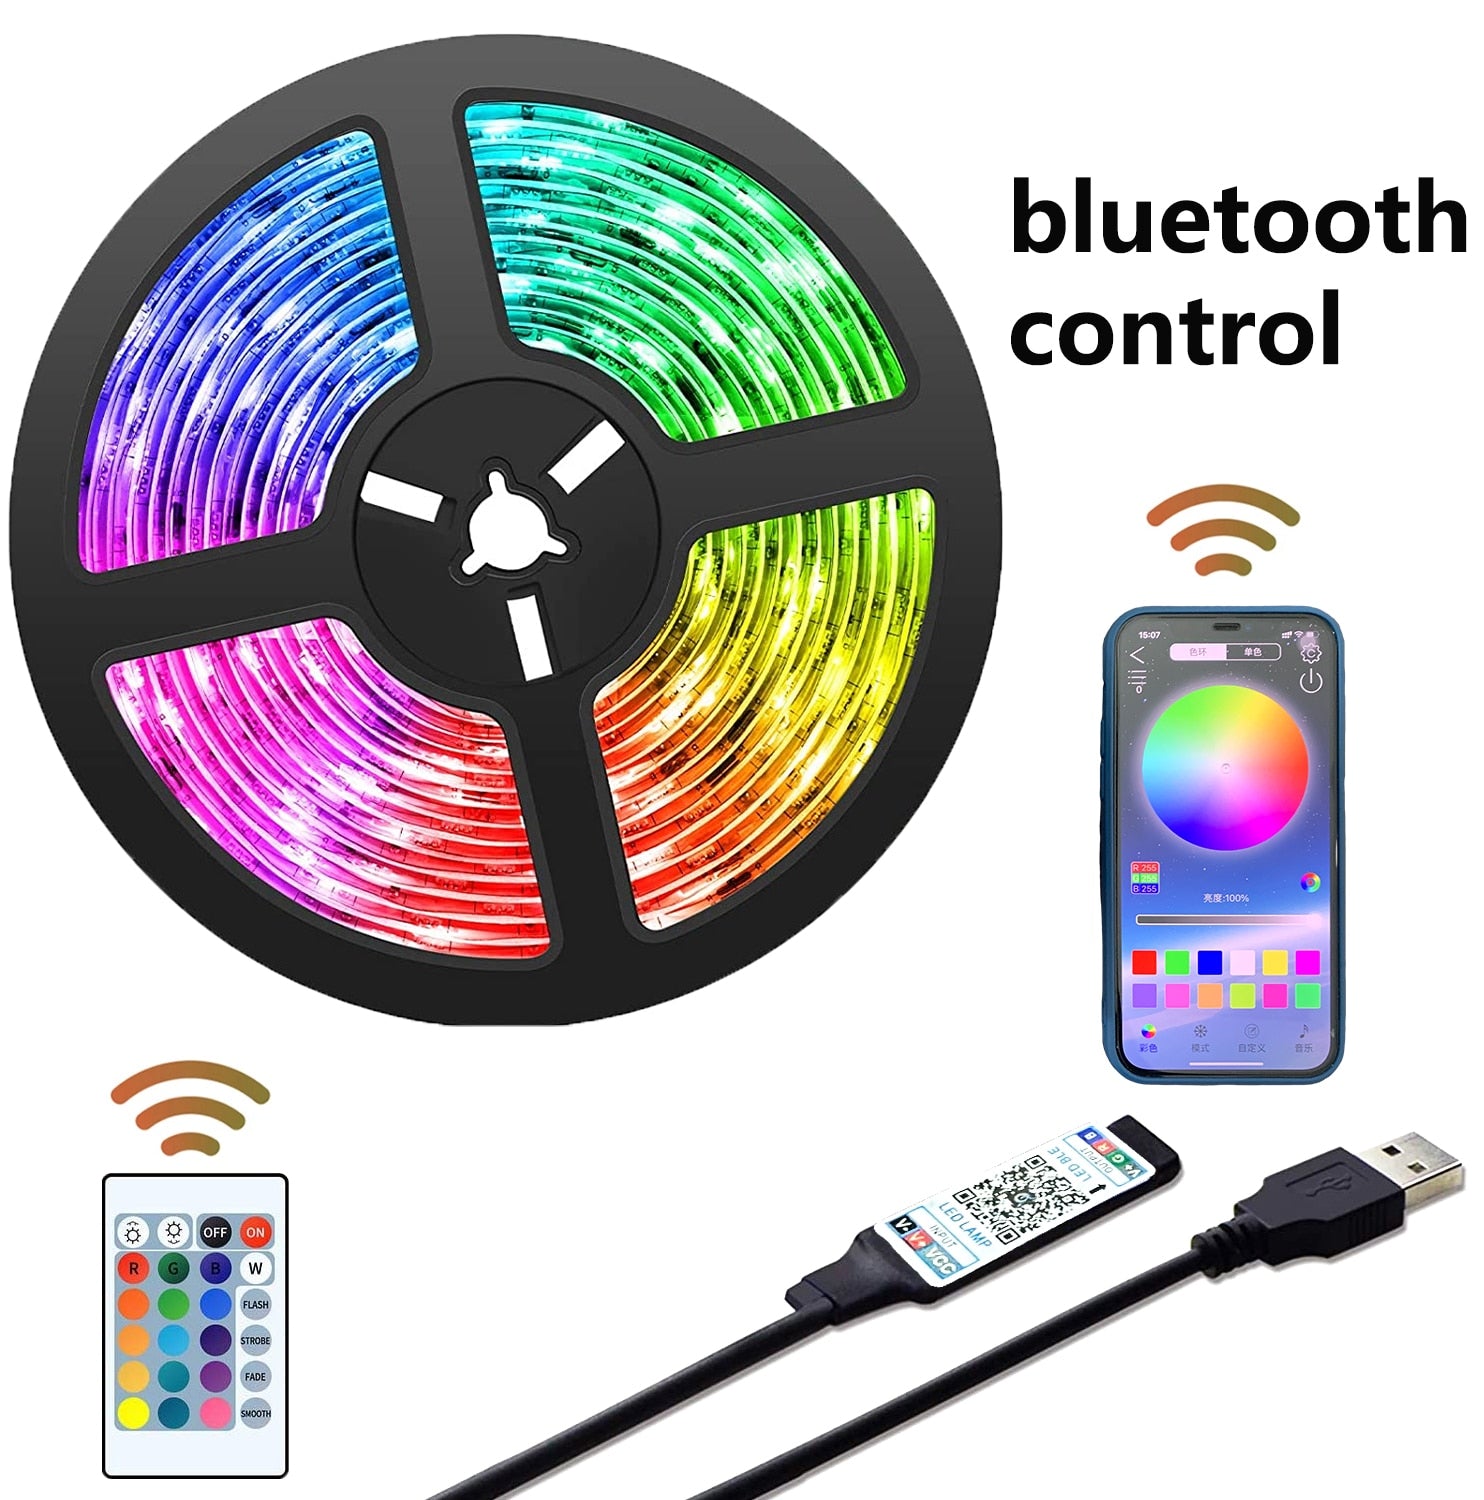 LED Strip Light Bluetooth USB Powered LED Lights Strips With Remote RGB 2835 Color Changing LED TV Backlights For Home Decor